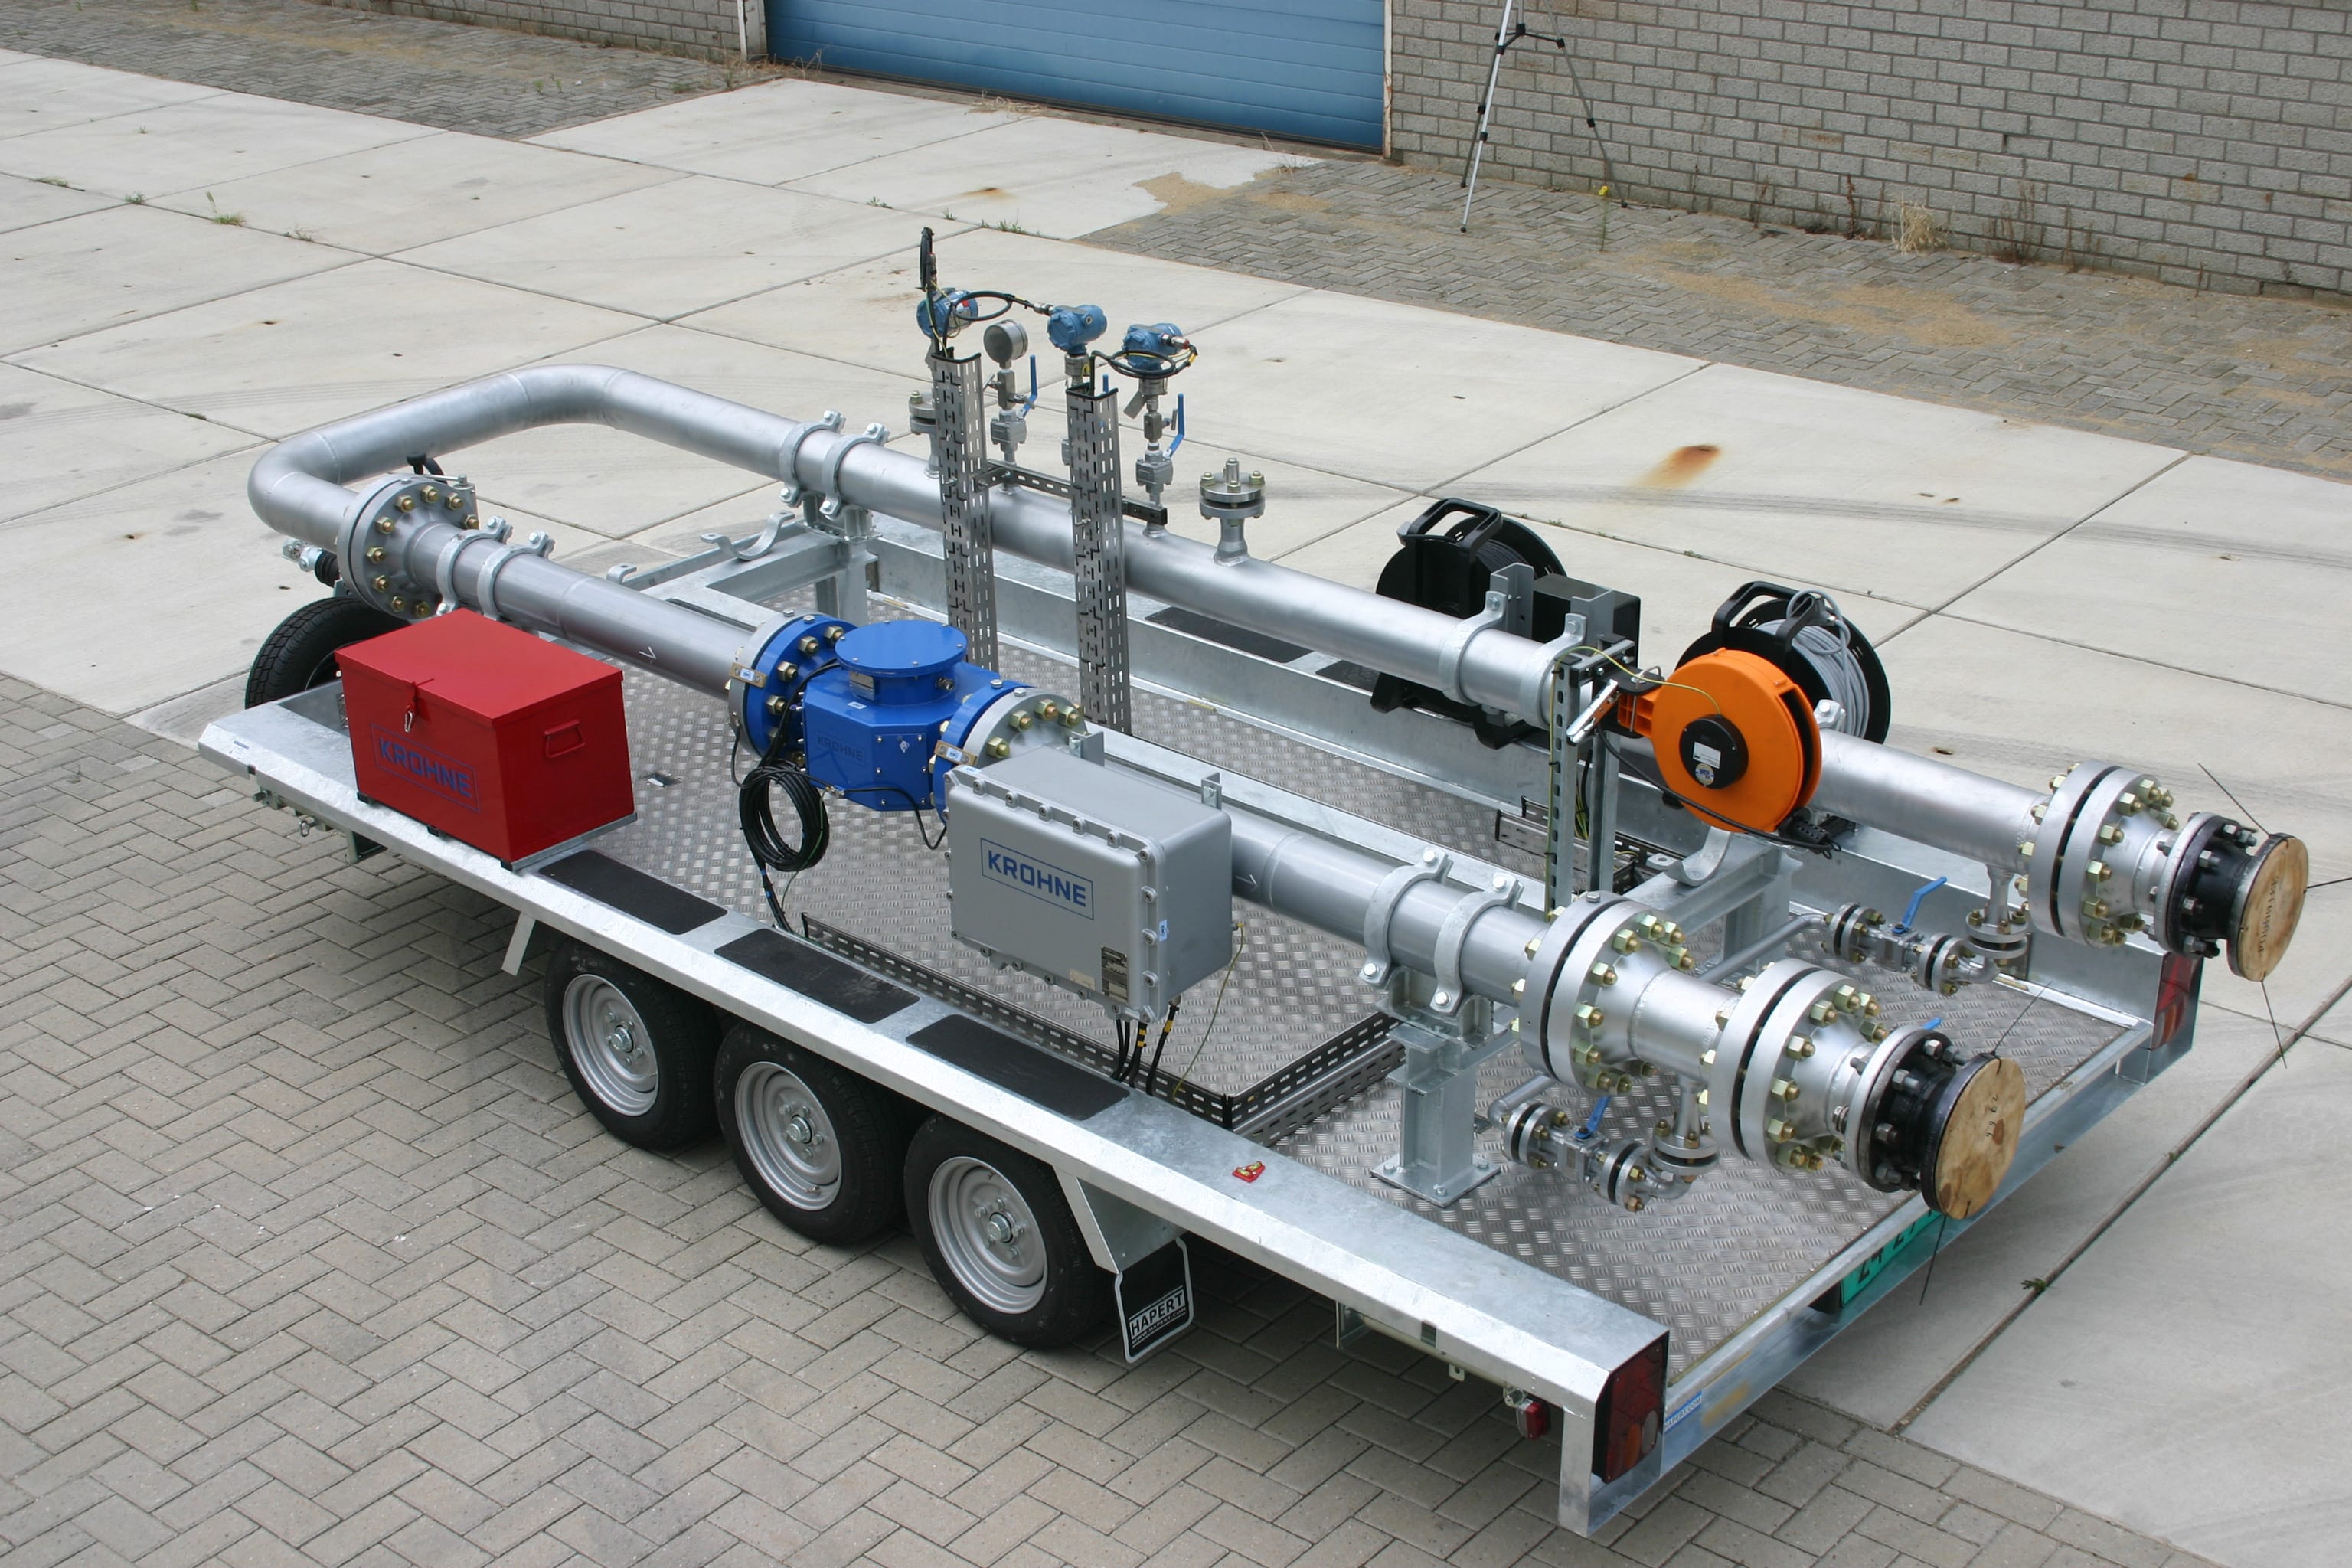 Mobile prover with ALTOSONIC ultrasonic flowmeter on a trailer